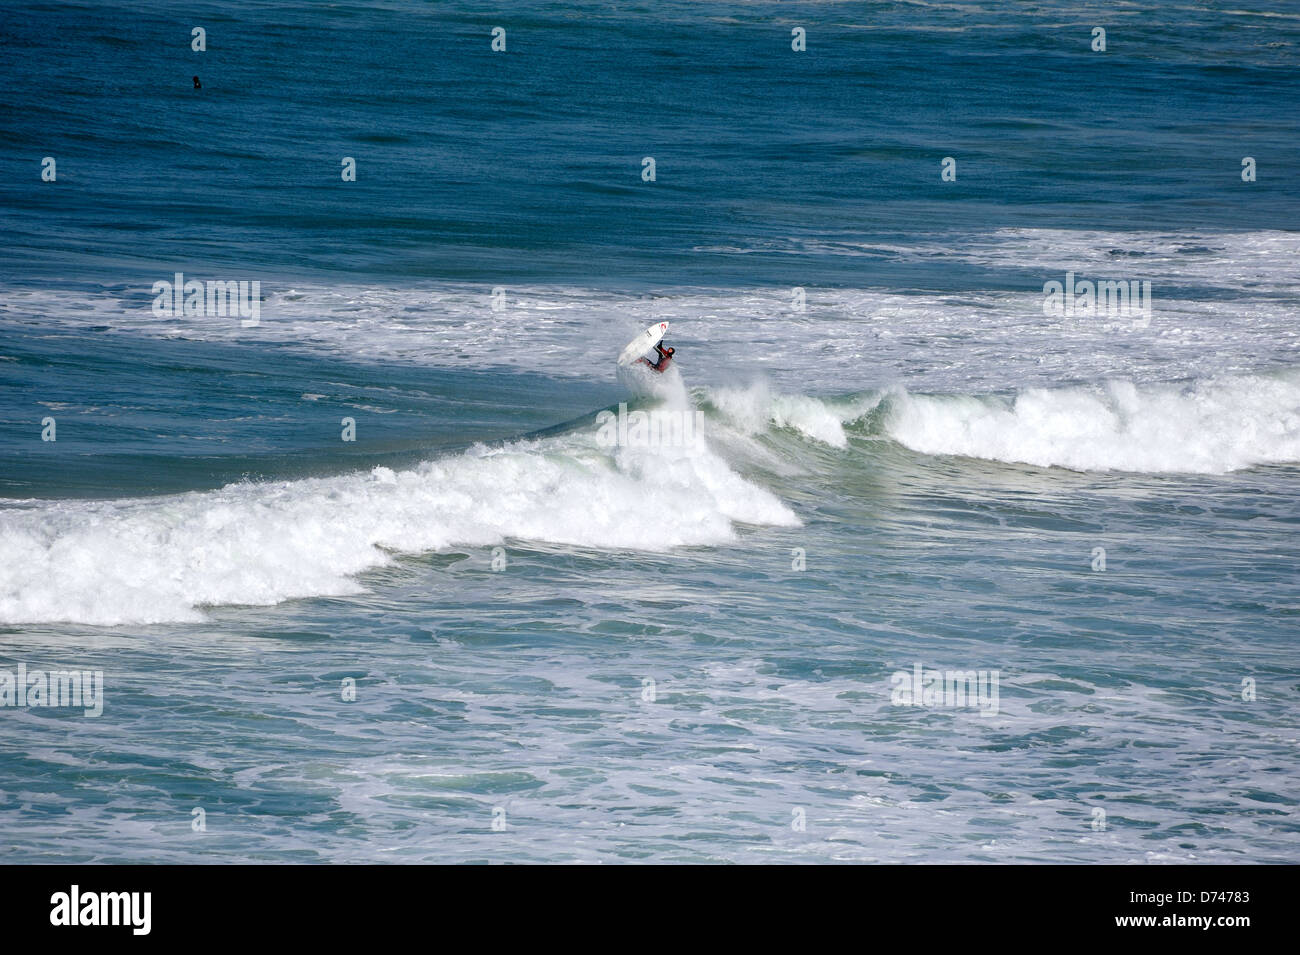 Surfer riding a wave about to wipe out Stock Photo